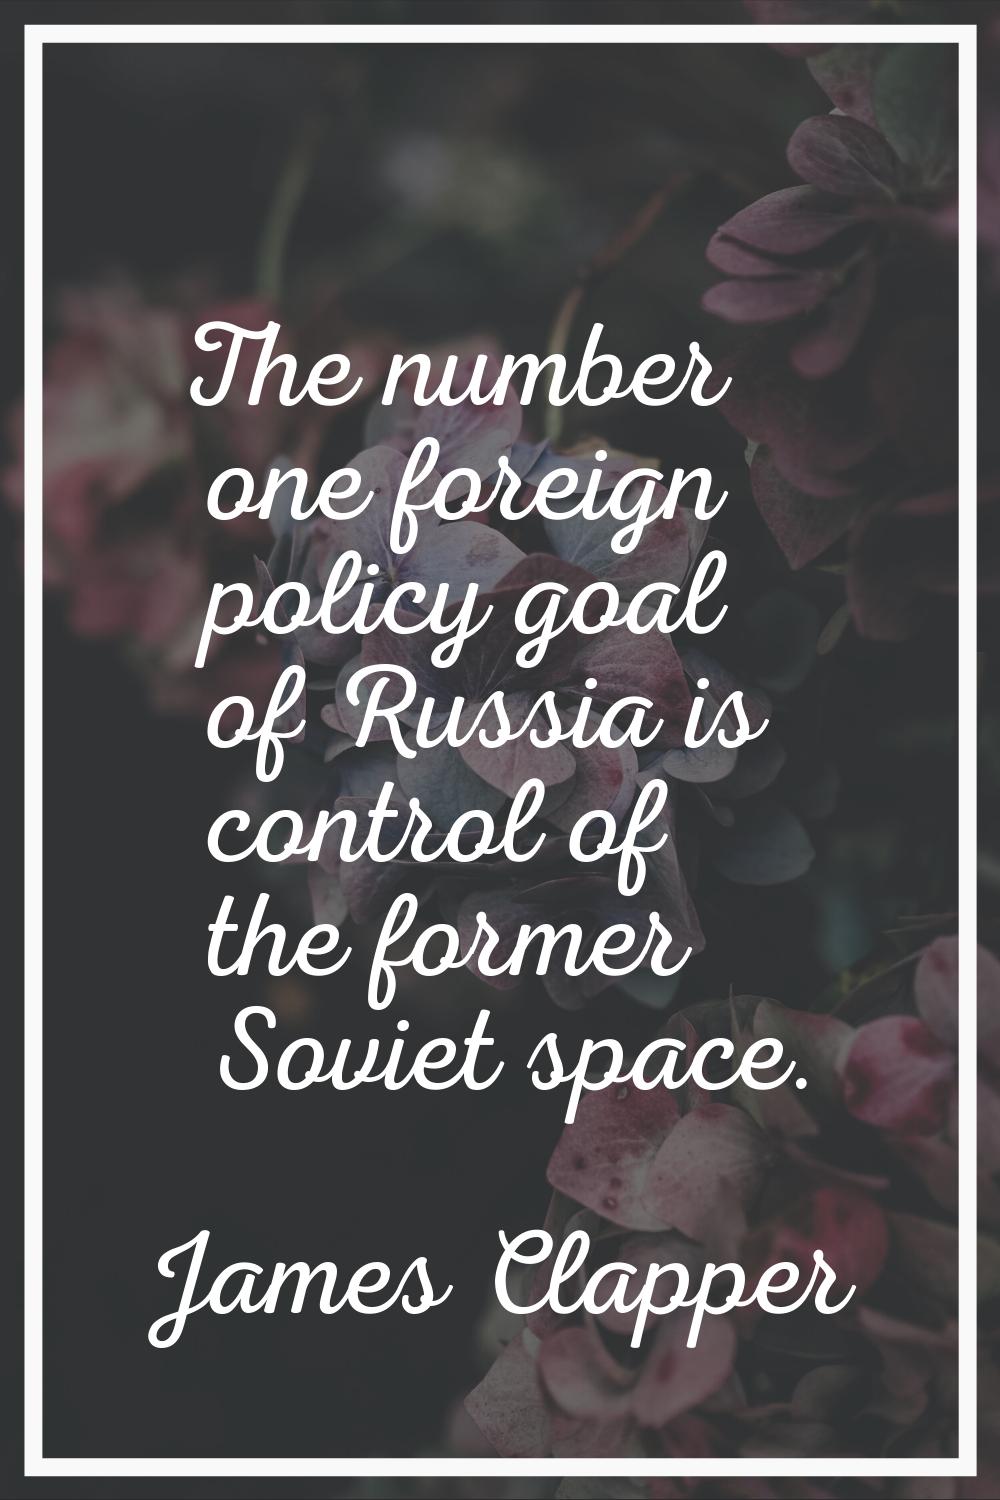 The number one foreign policy goal of Russia is control of the former Soviet space.